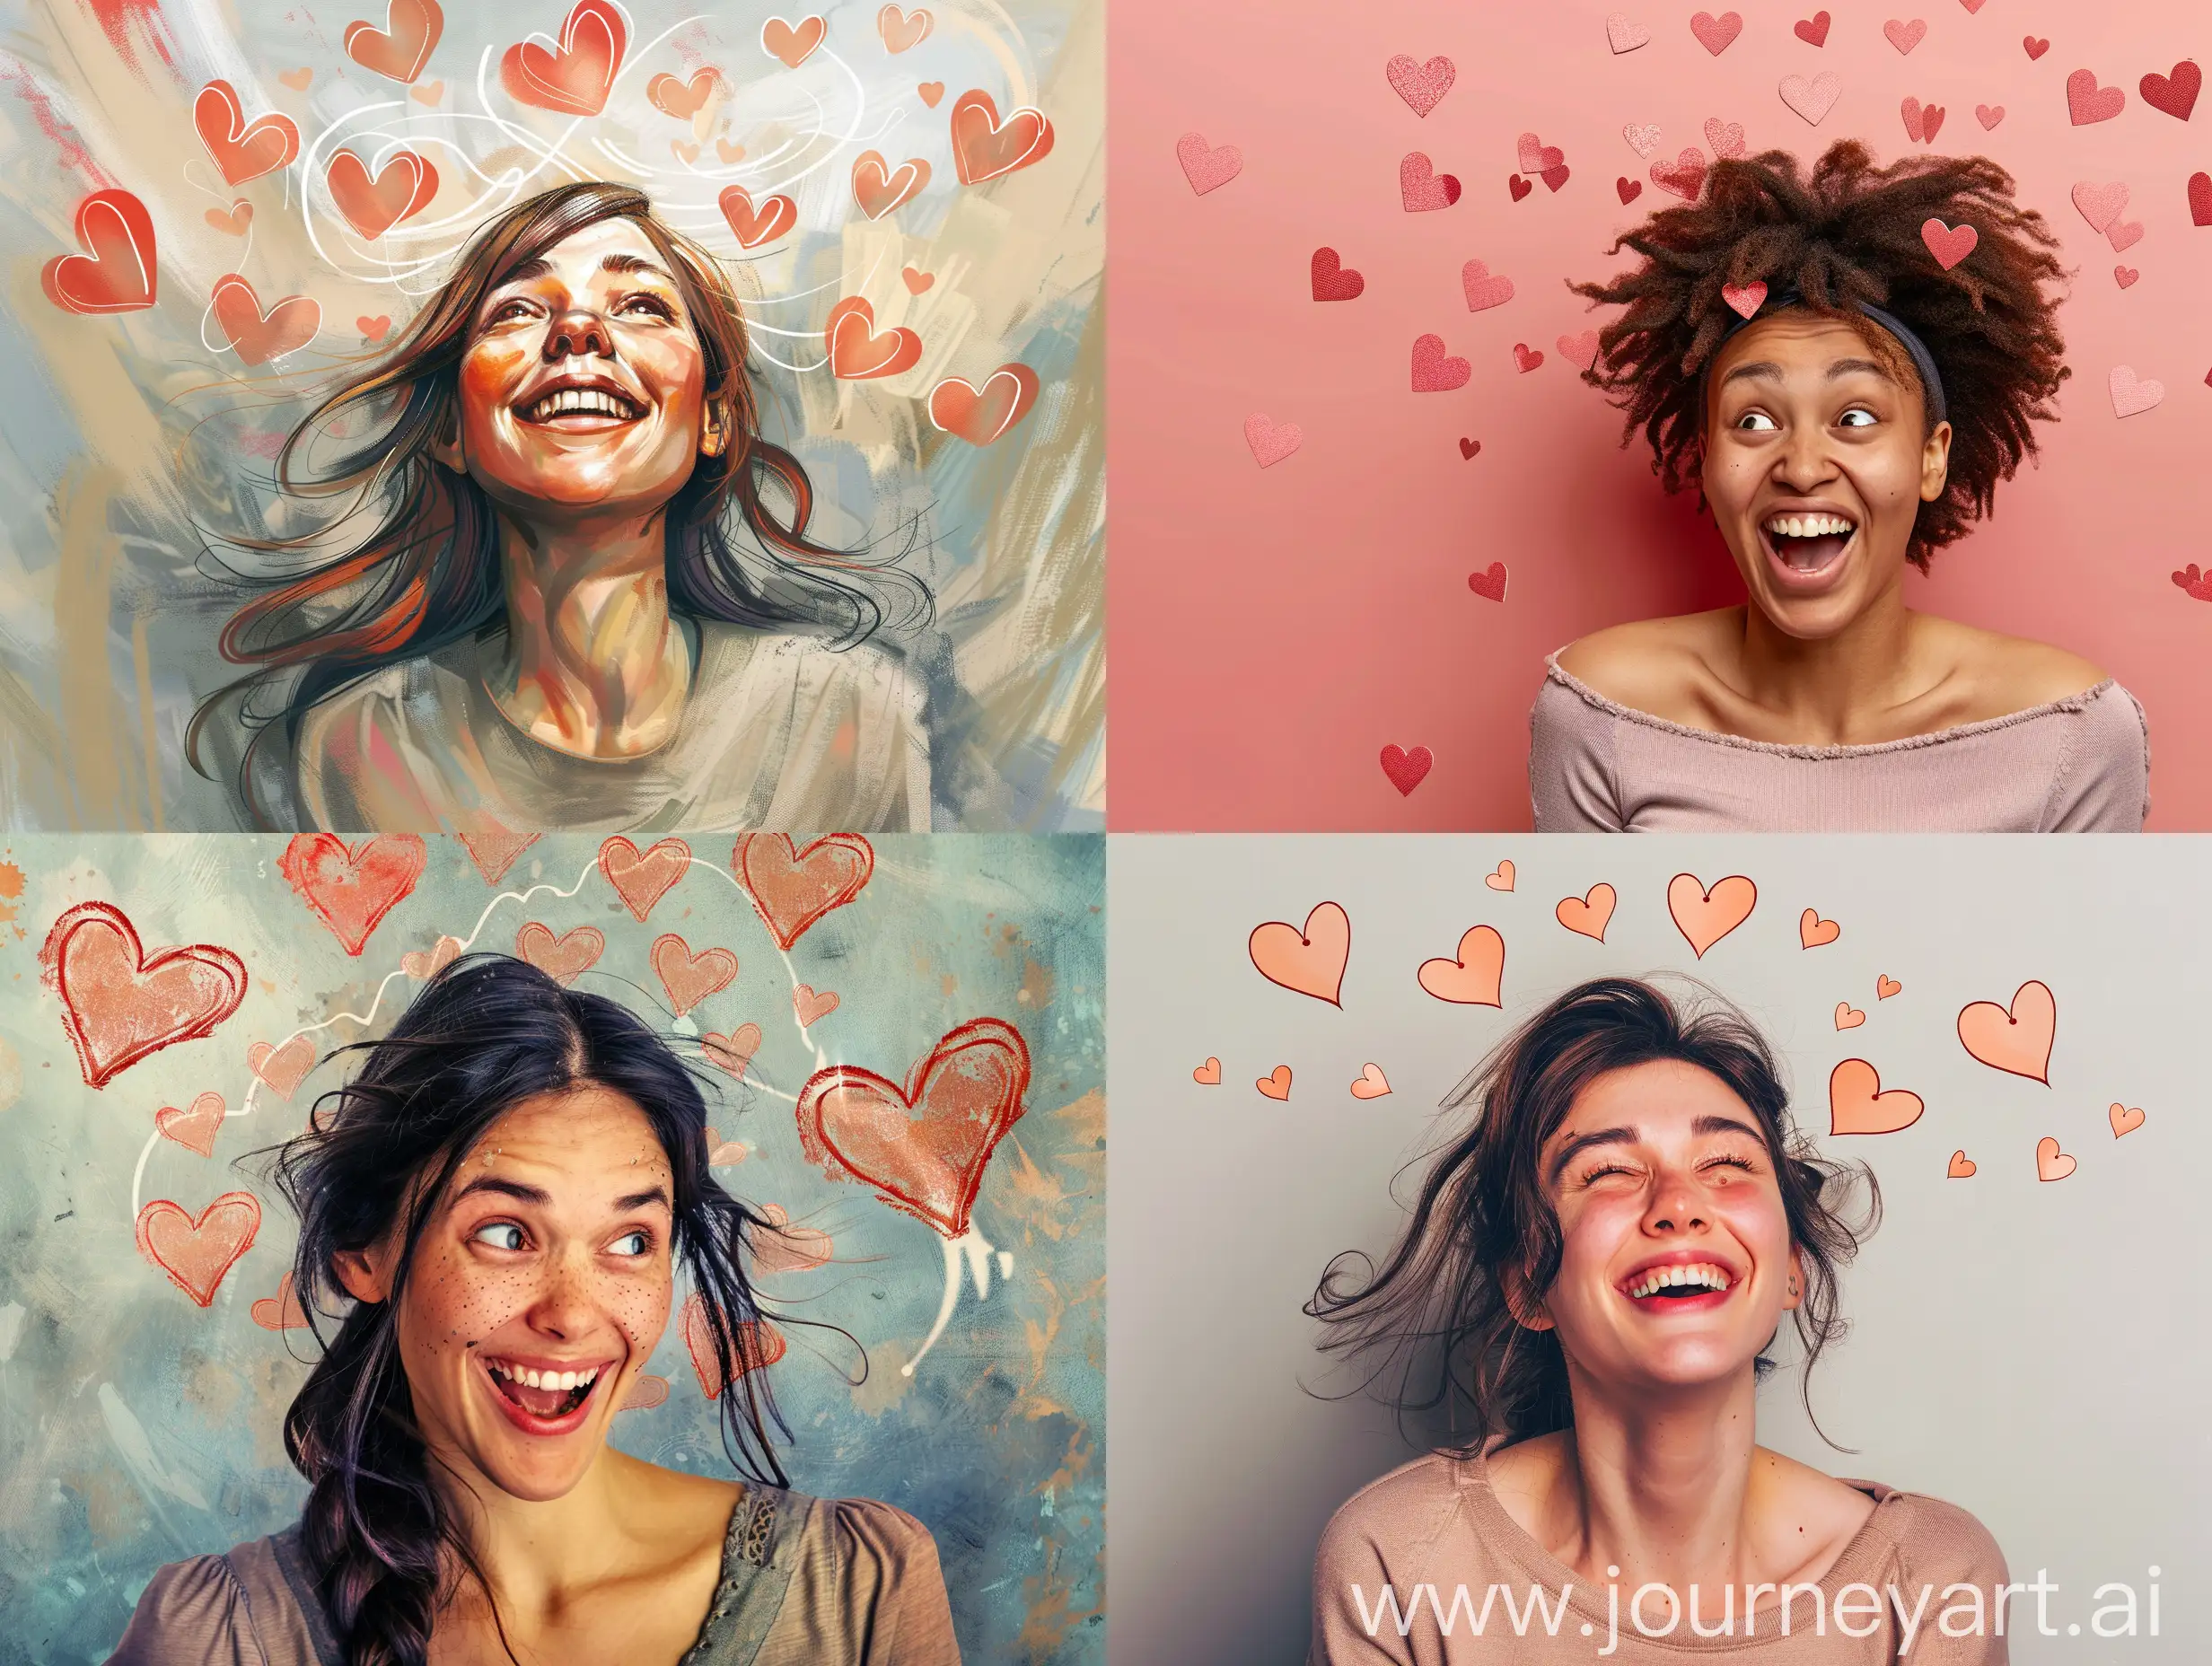 **portrait of a woman with an expression of joy and delight on her face and hearts swirling above her for valentine's day 